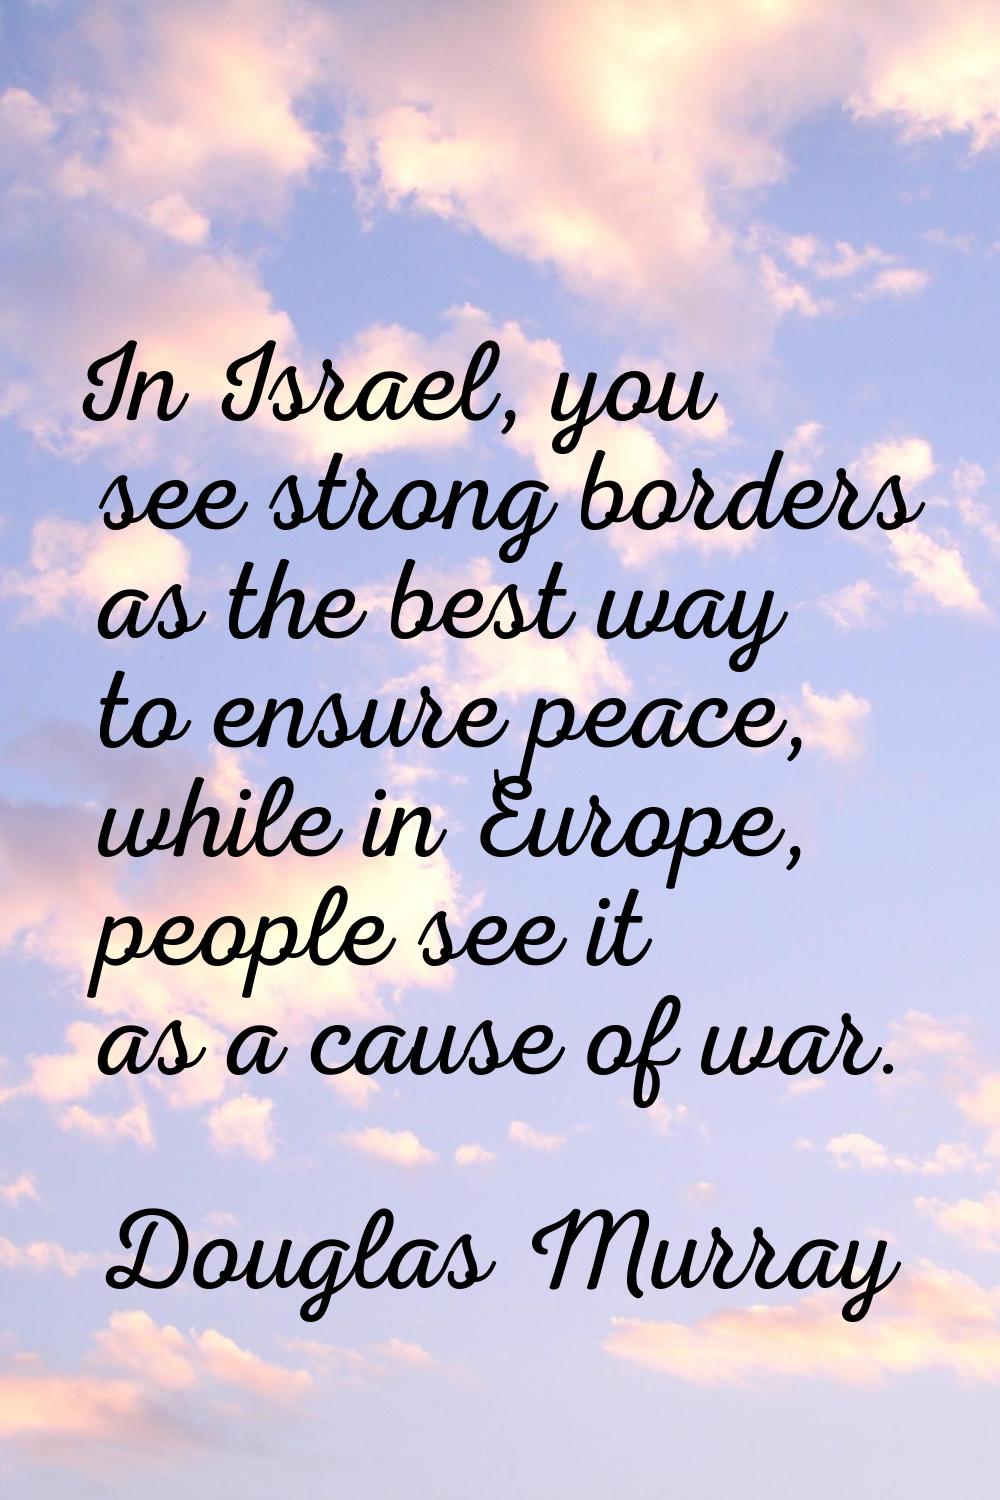 In Israel, you see strong borders as the best way to ensure peace, while in Europe, people see it a